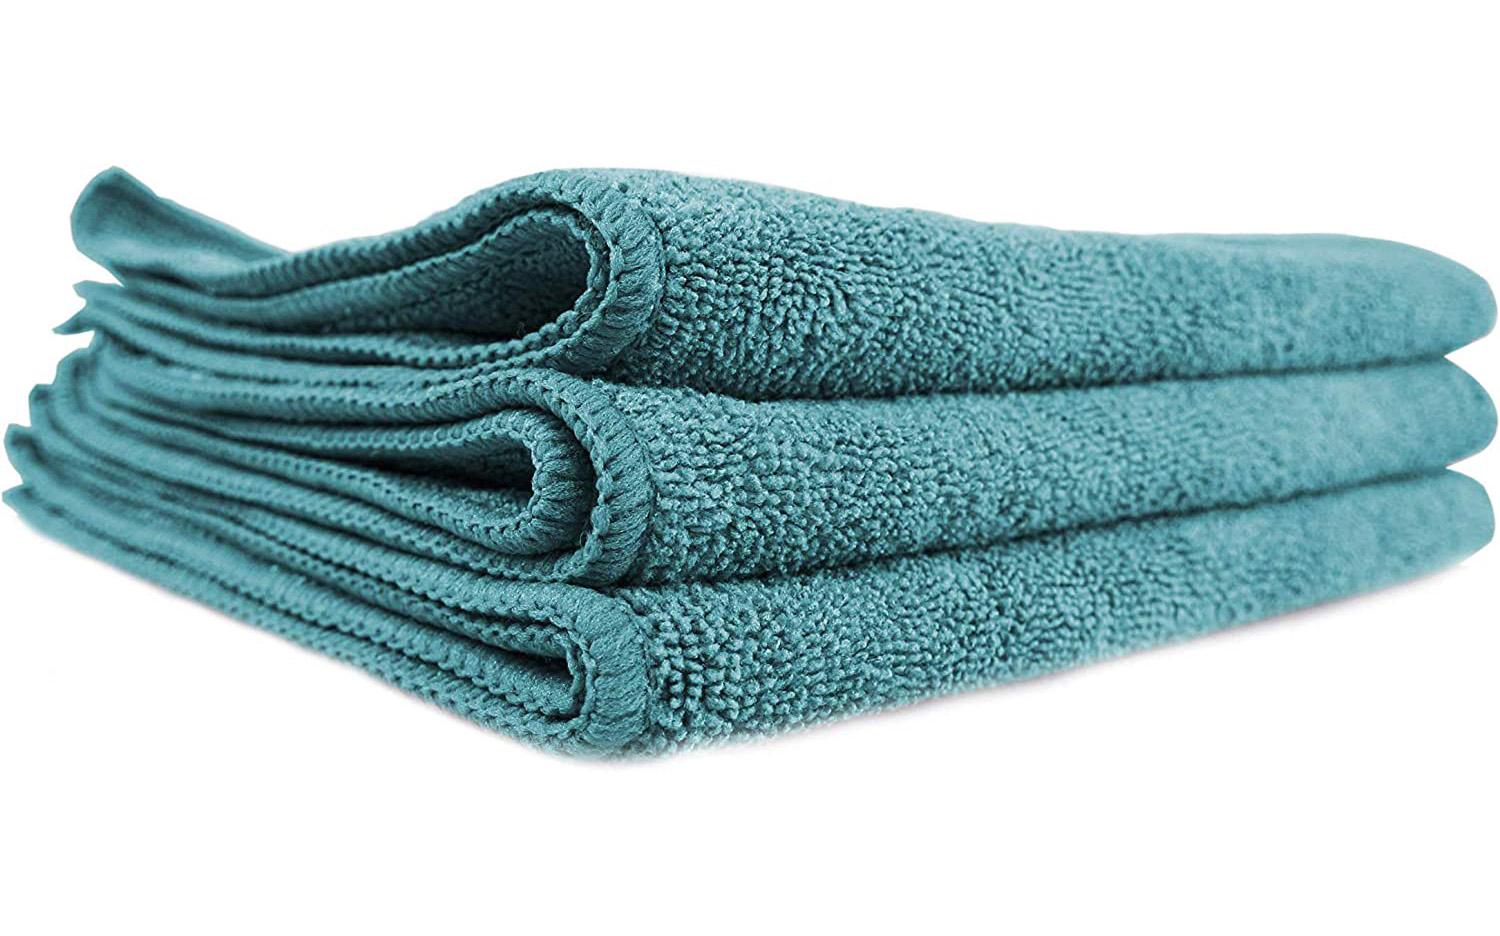 Chemical Guys Workhorse Professional Grade Microfiber Towel 3 Pack for $3.26 Shipped